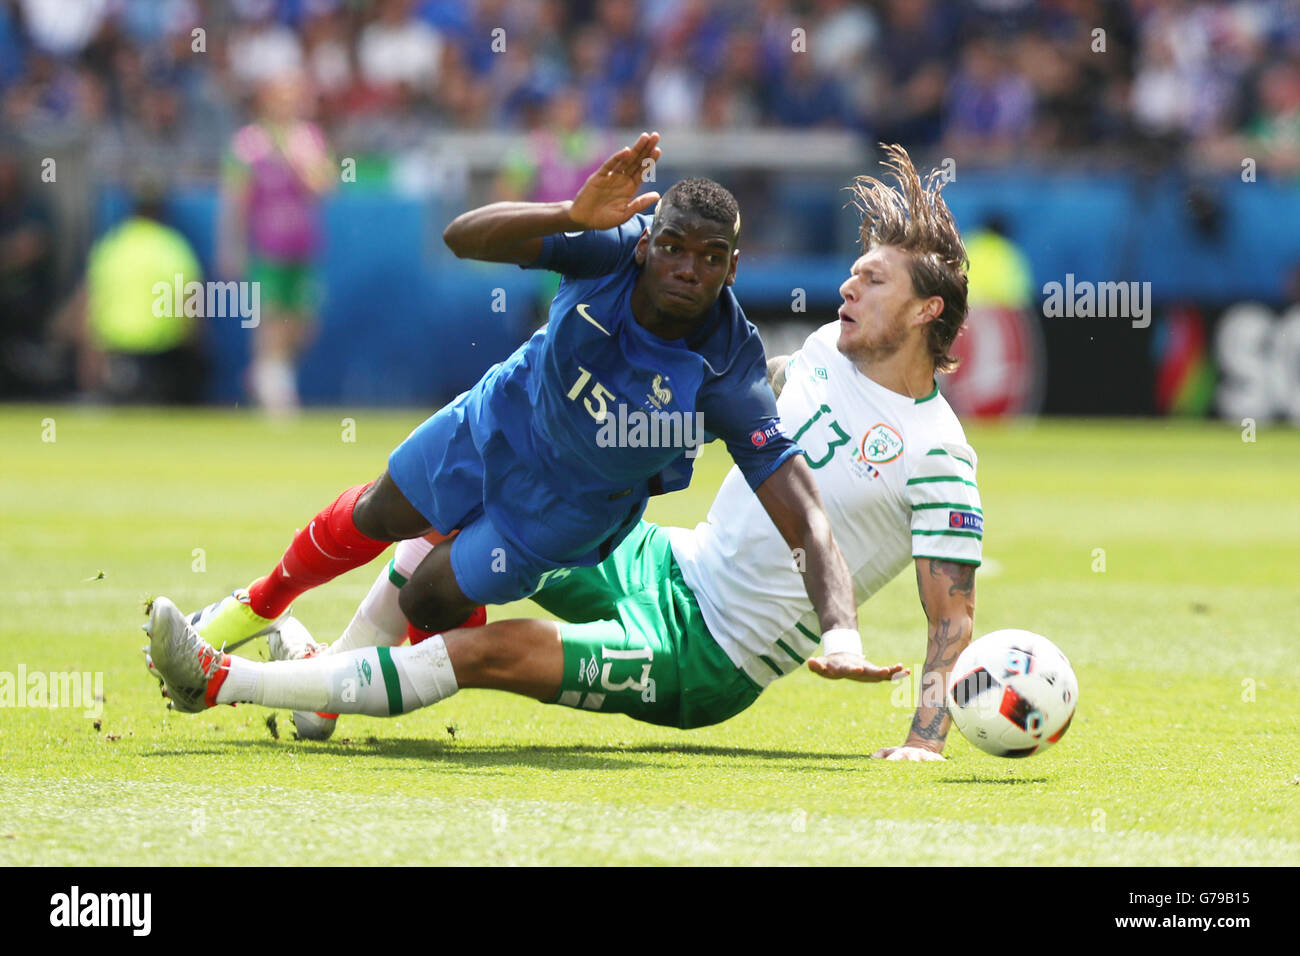 (160626) -- LYON, June 26, 2016 (Xinhua) -- France's Paul Pogba (L) and Ireland's Jeff Hendrick vie for the ball during the Euro 2016 round of 16 football match between France and Republic of Ireland in Lyon, France, June 26, 2016. (Xinhua/Bai Xuefei) Stock Photo